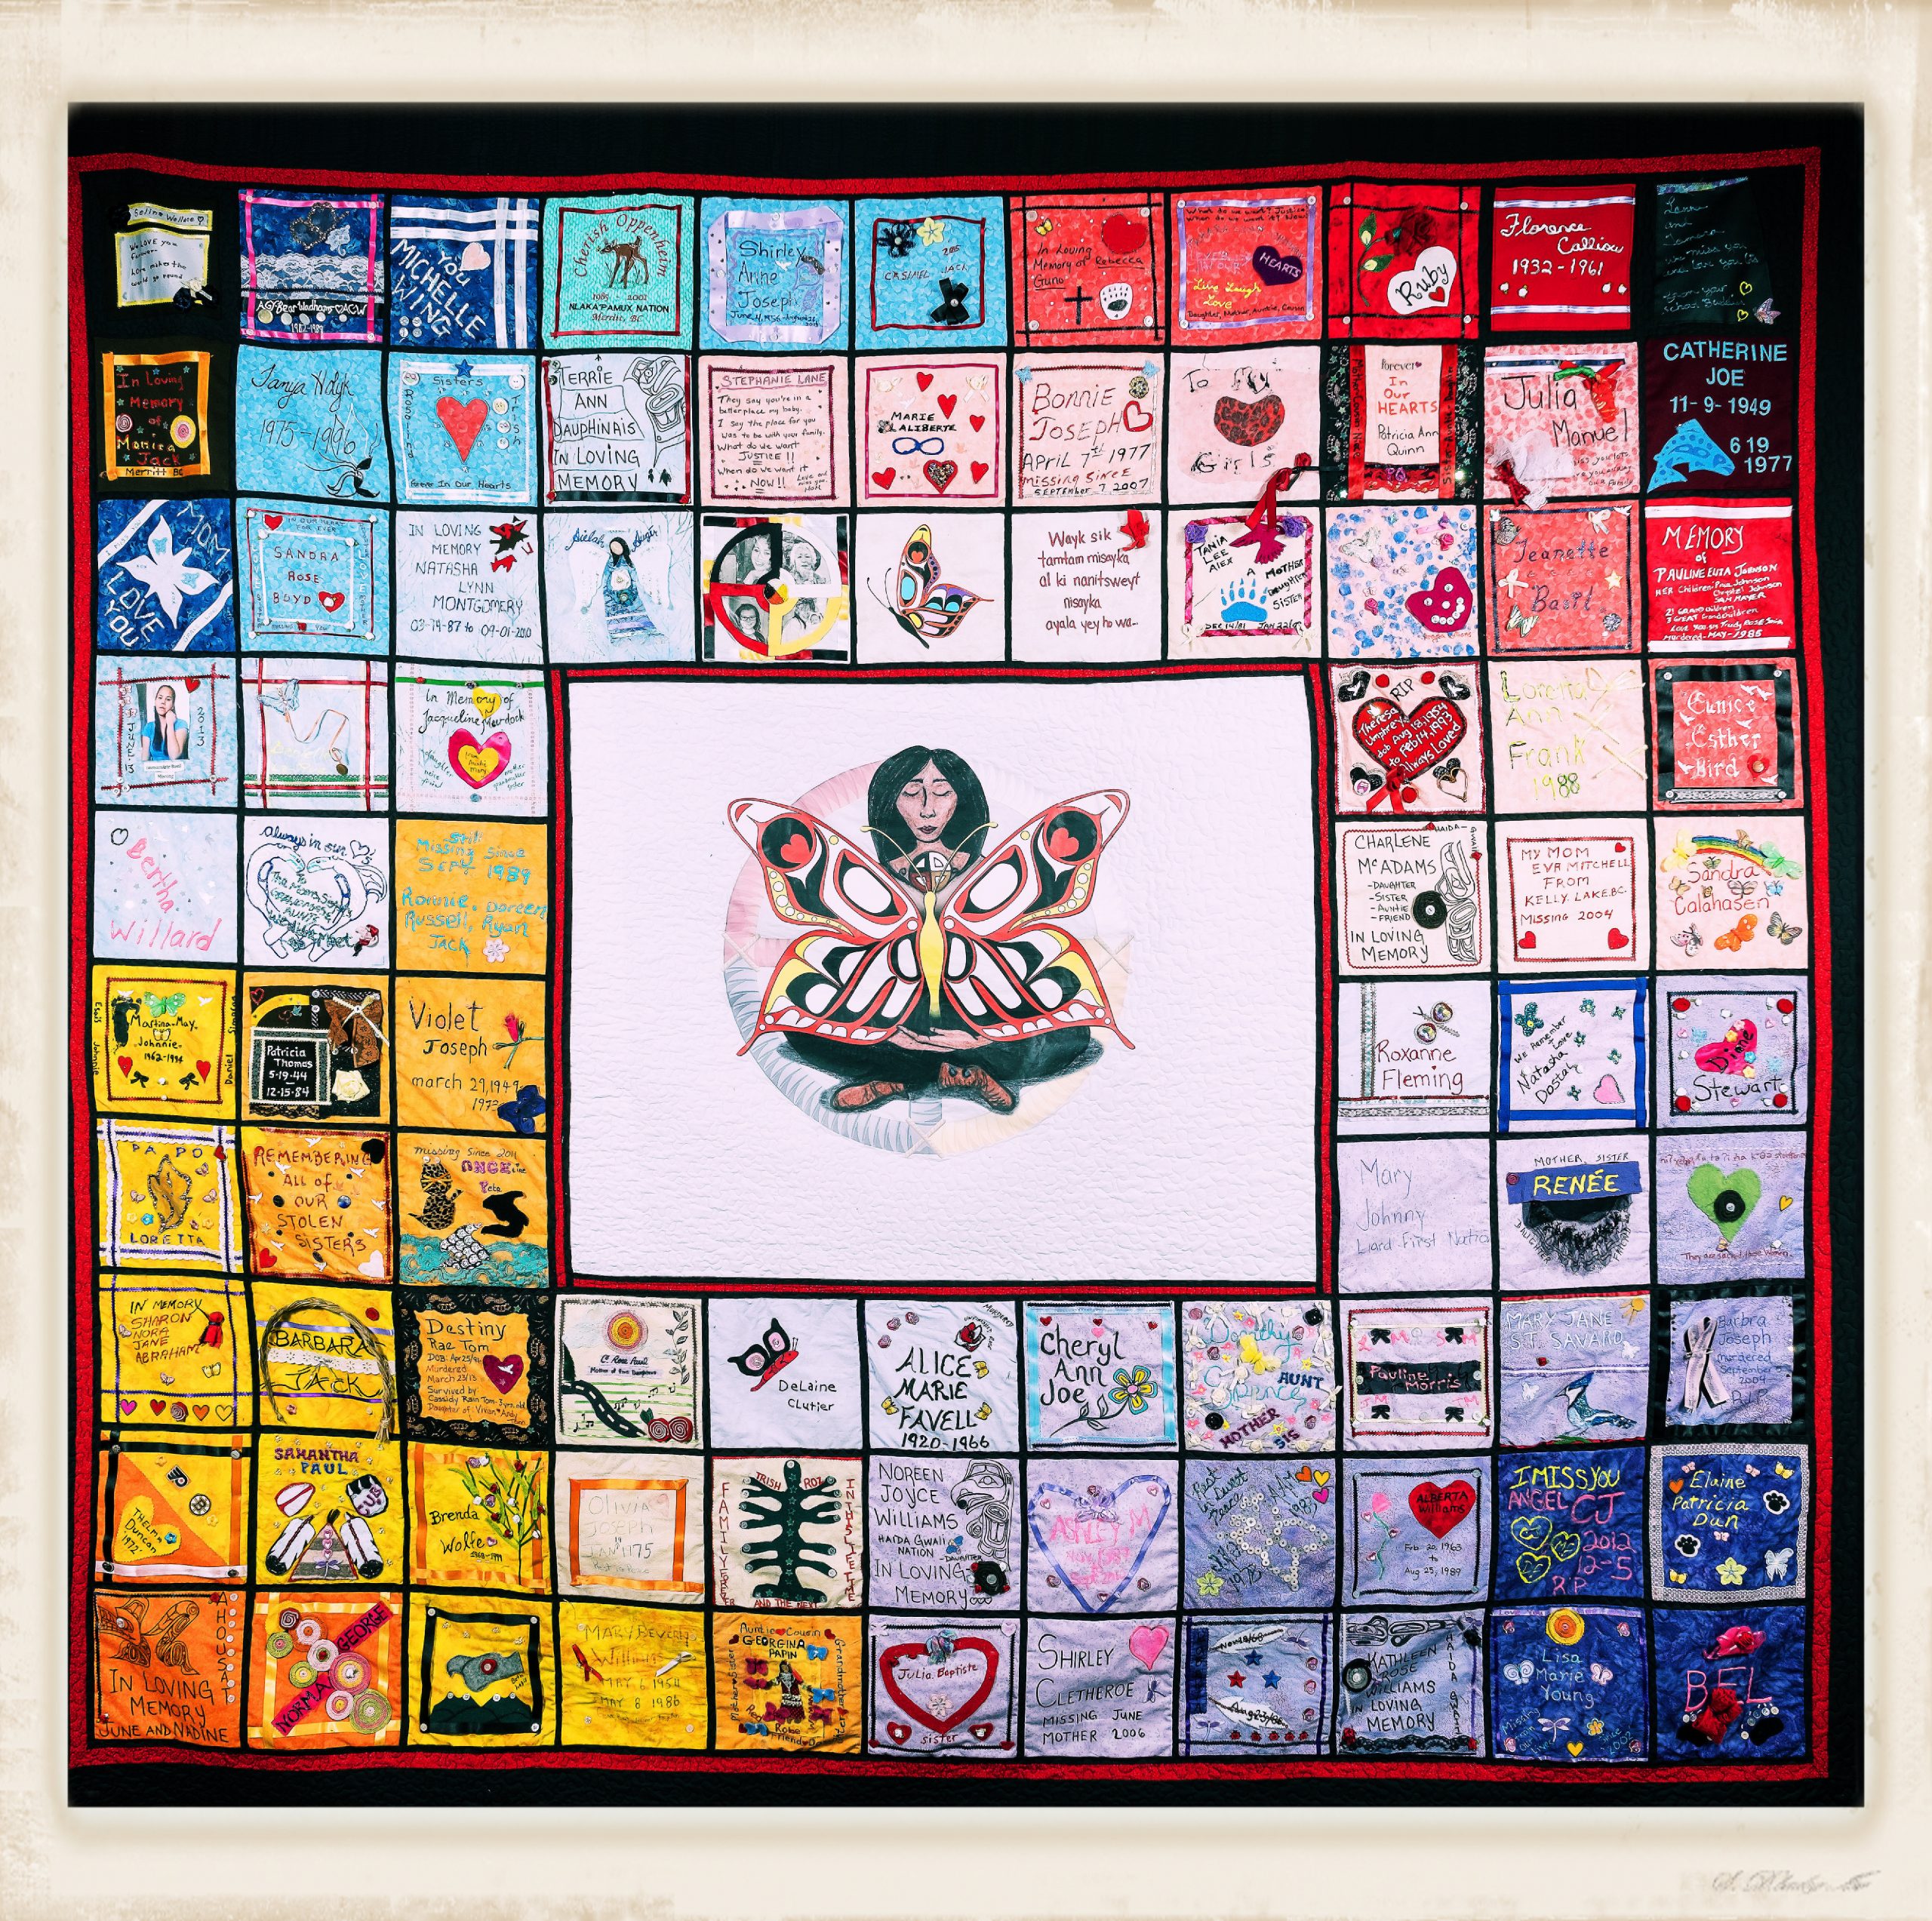 quilt with images expressing love for, messages to, and names of murdered and missing Indigenous women and girls